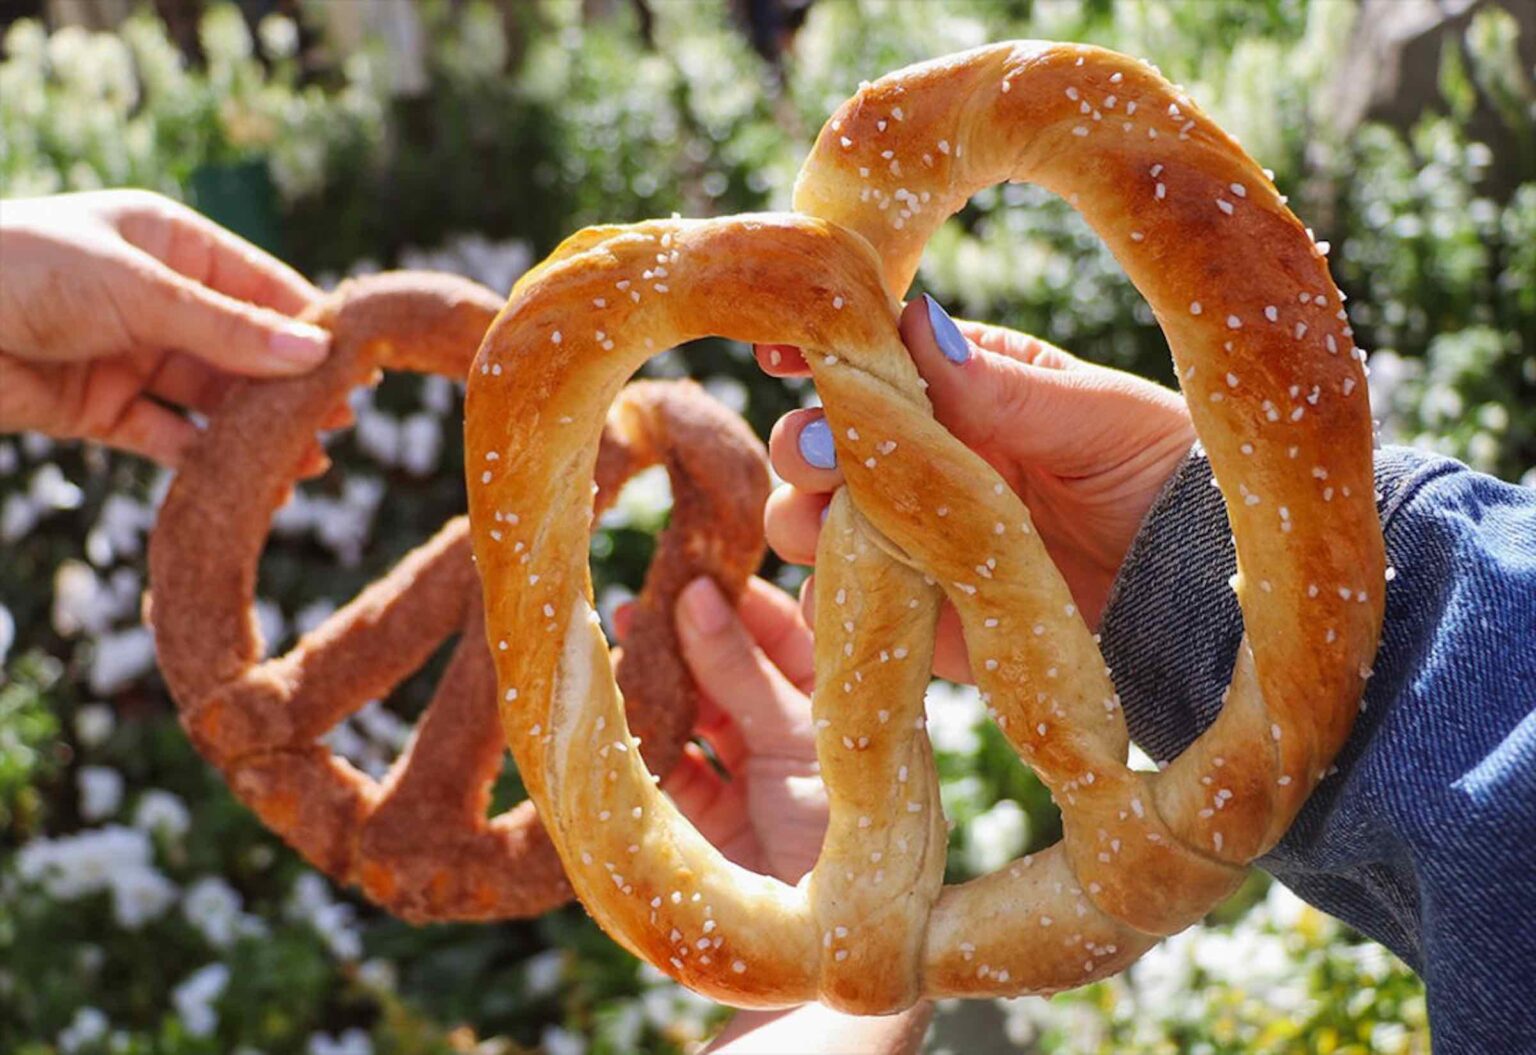 Excited for National Pretzel Day today? Grab your yeast and dive into the best easy pretzel recipes to help you celebrate!